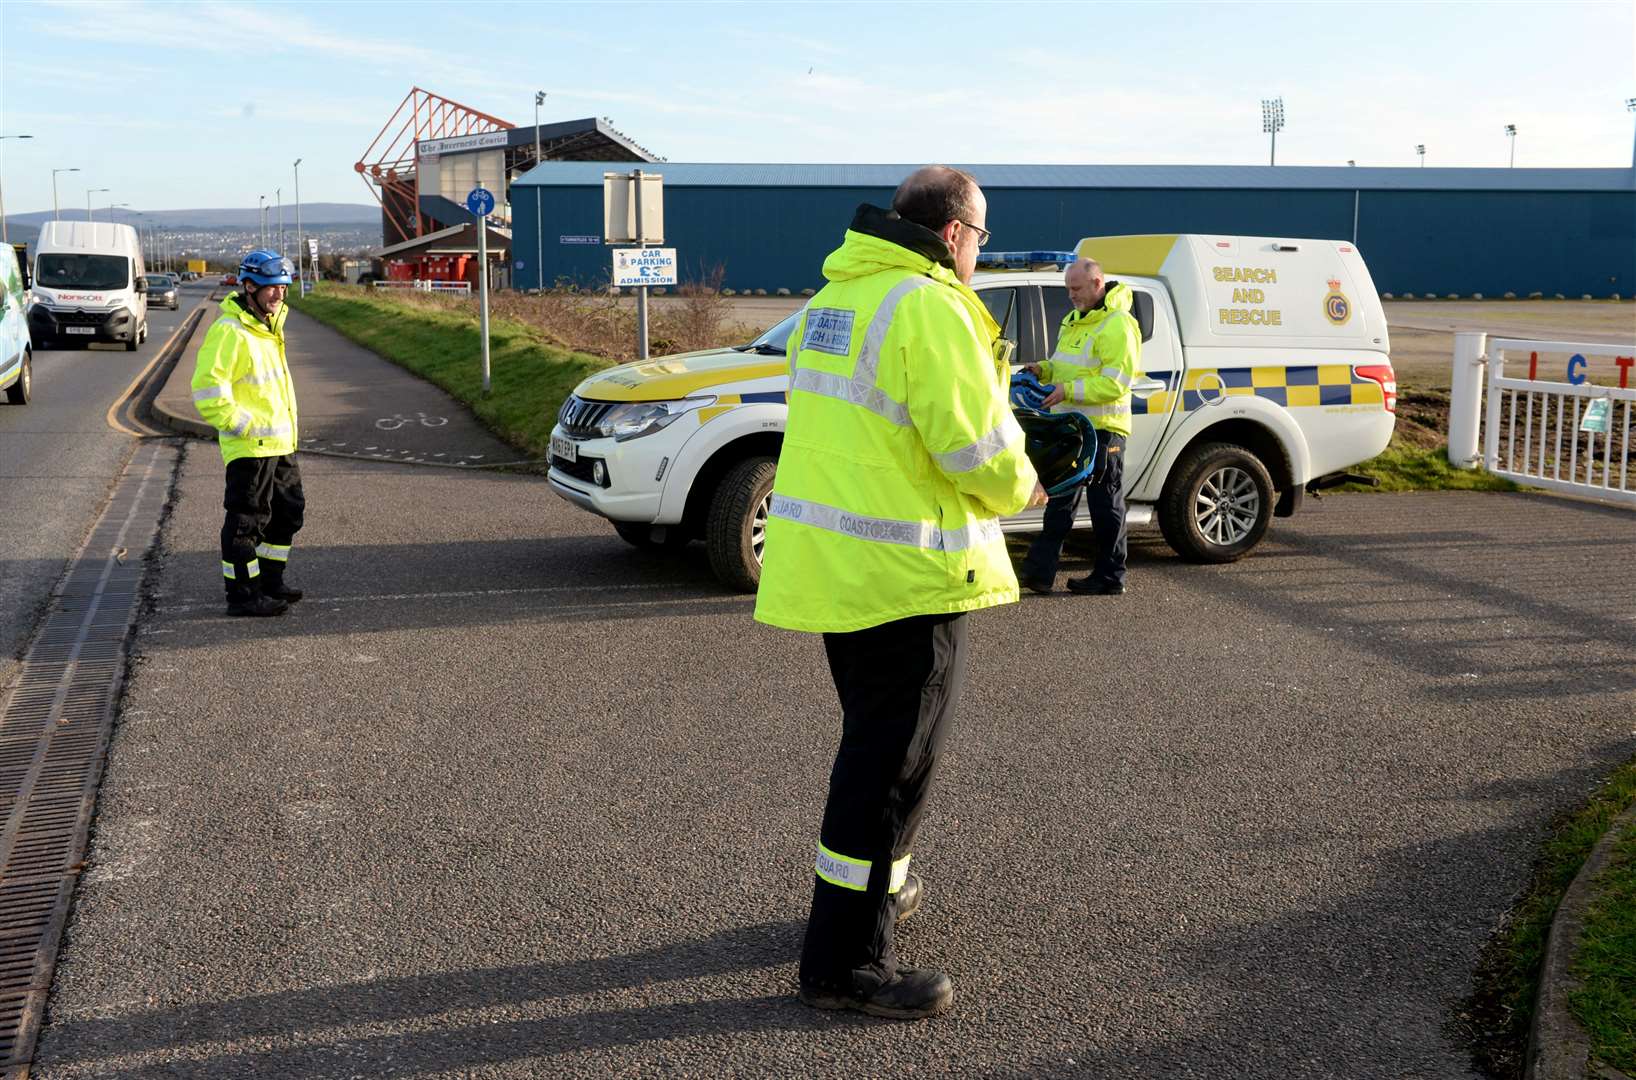 Officers from the coastguard returned to the scene this afternoon but it was felt nothing could be done about until bomb disposal experts arrived and the tide was out. It is understood they will return tomorrow afternoon. Picture: James MacKenzie